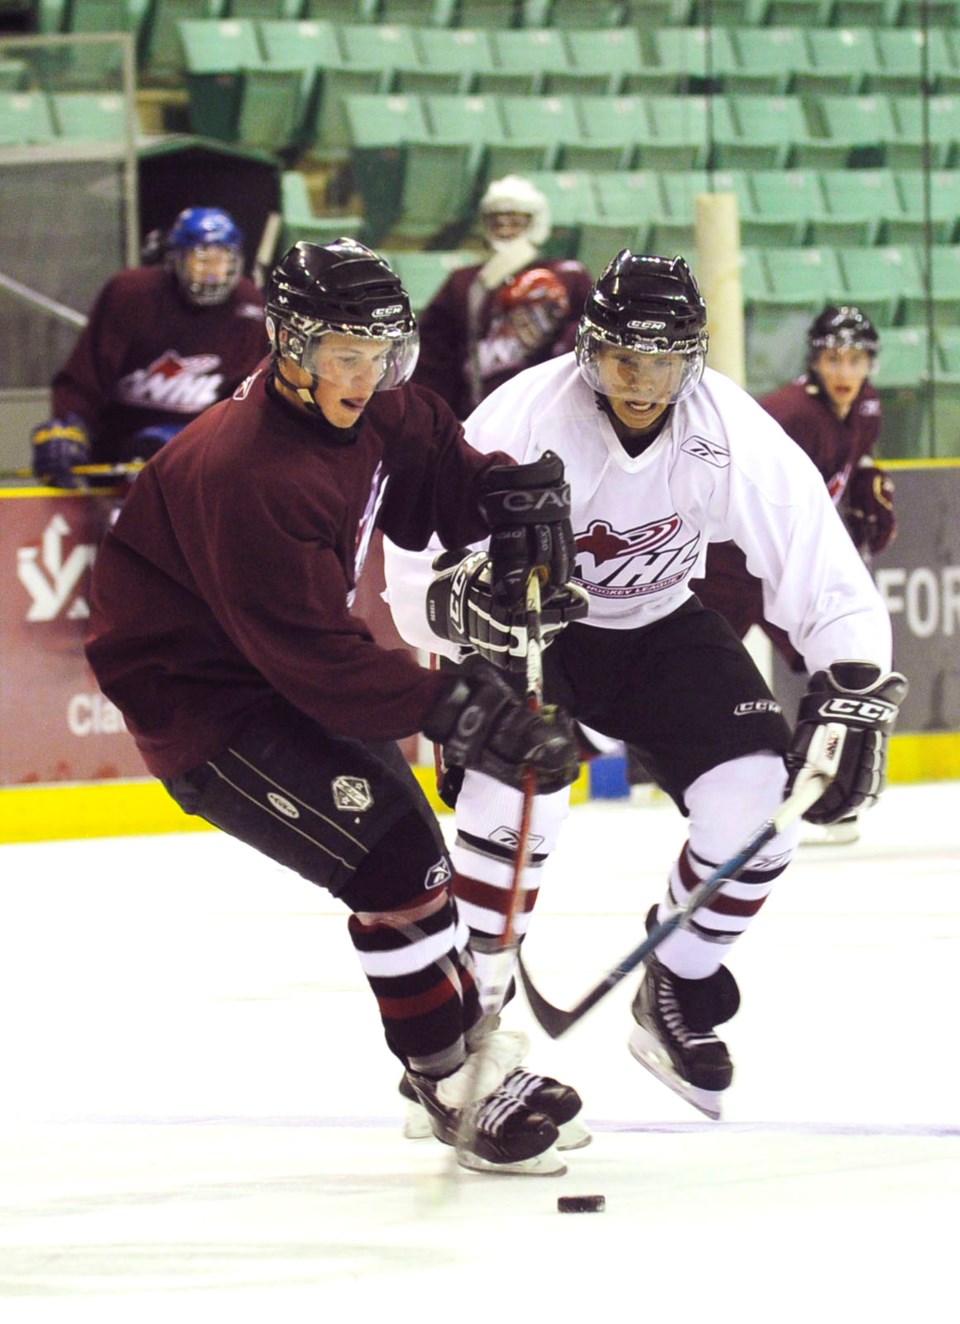 The Red Deer Rebels training camp kicked off this weekend with players coming from all over Alberta. Joel Hamilton, right, from Cochrane, AB tries to steal the puck from